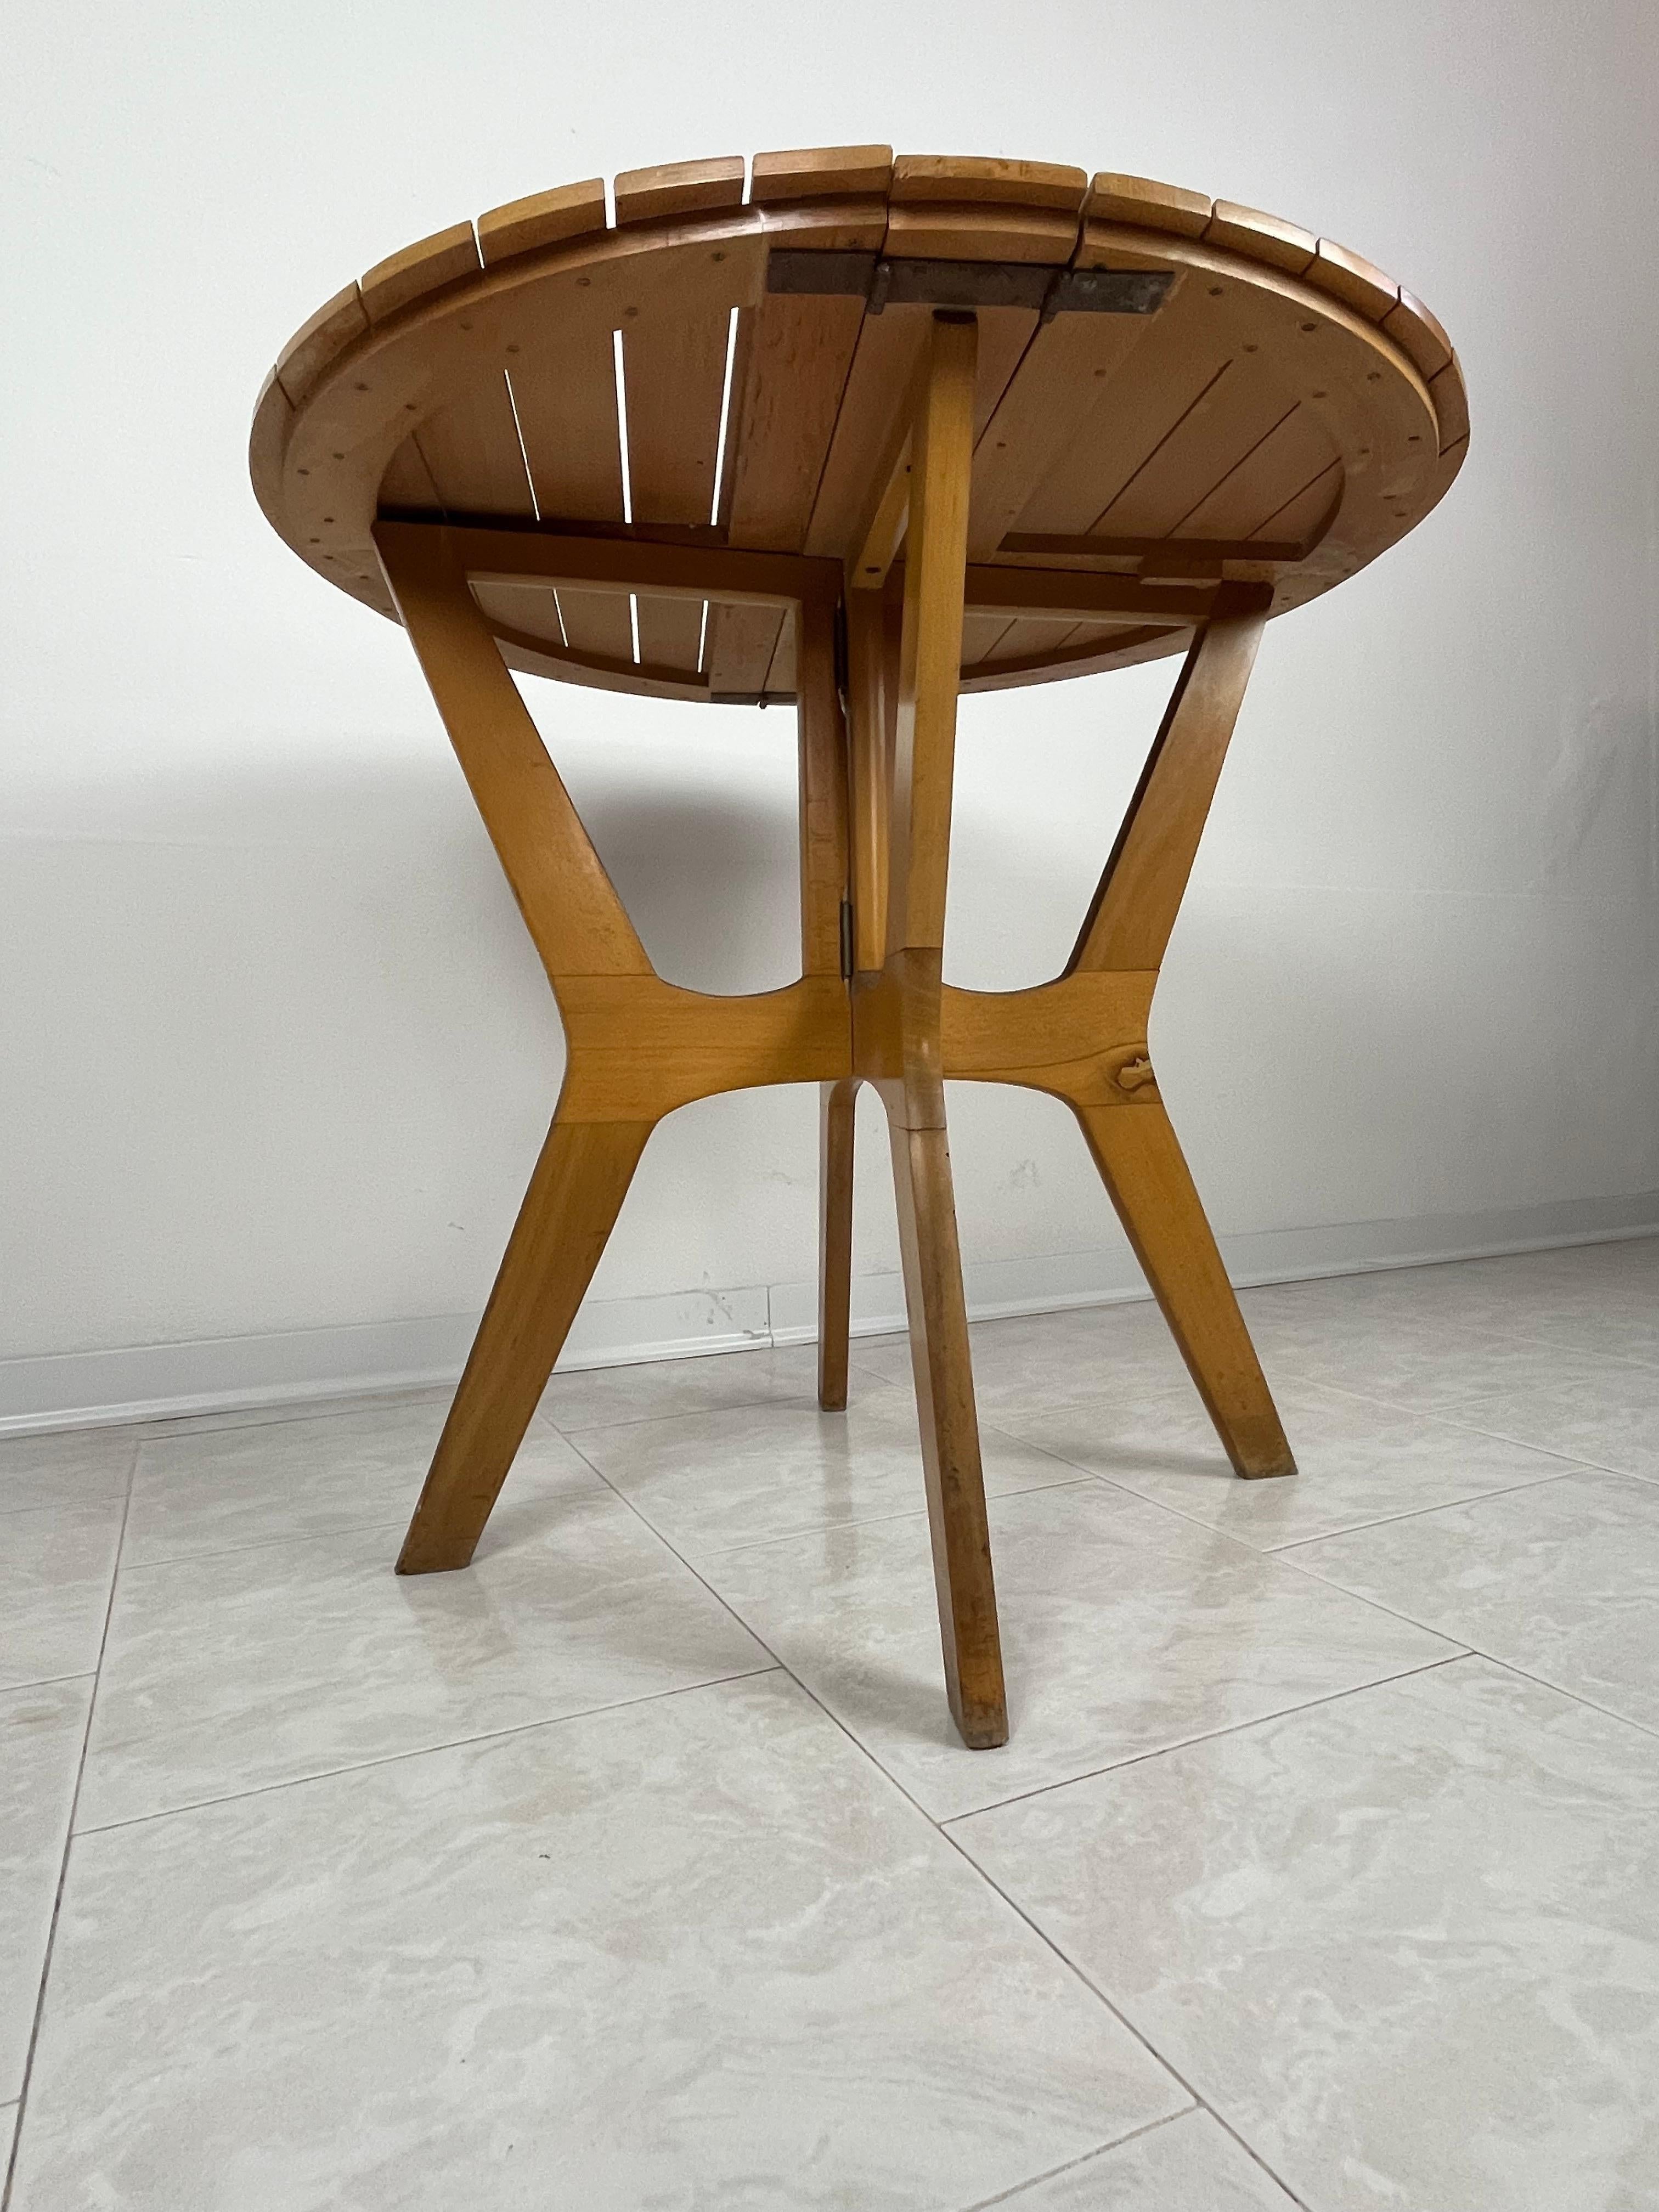 Folding Table in Maple Wood, Fada Asiago, Italy, 1976 For Sale 6